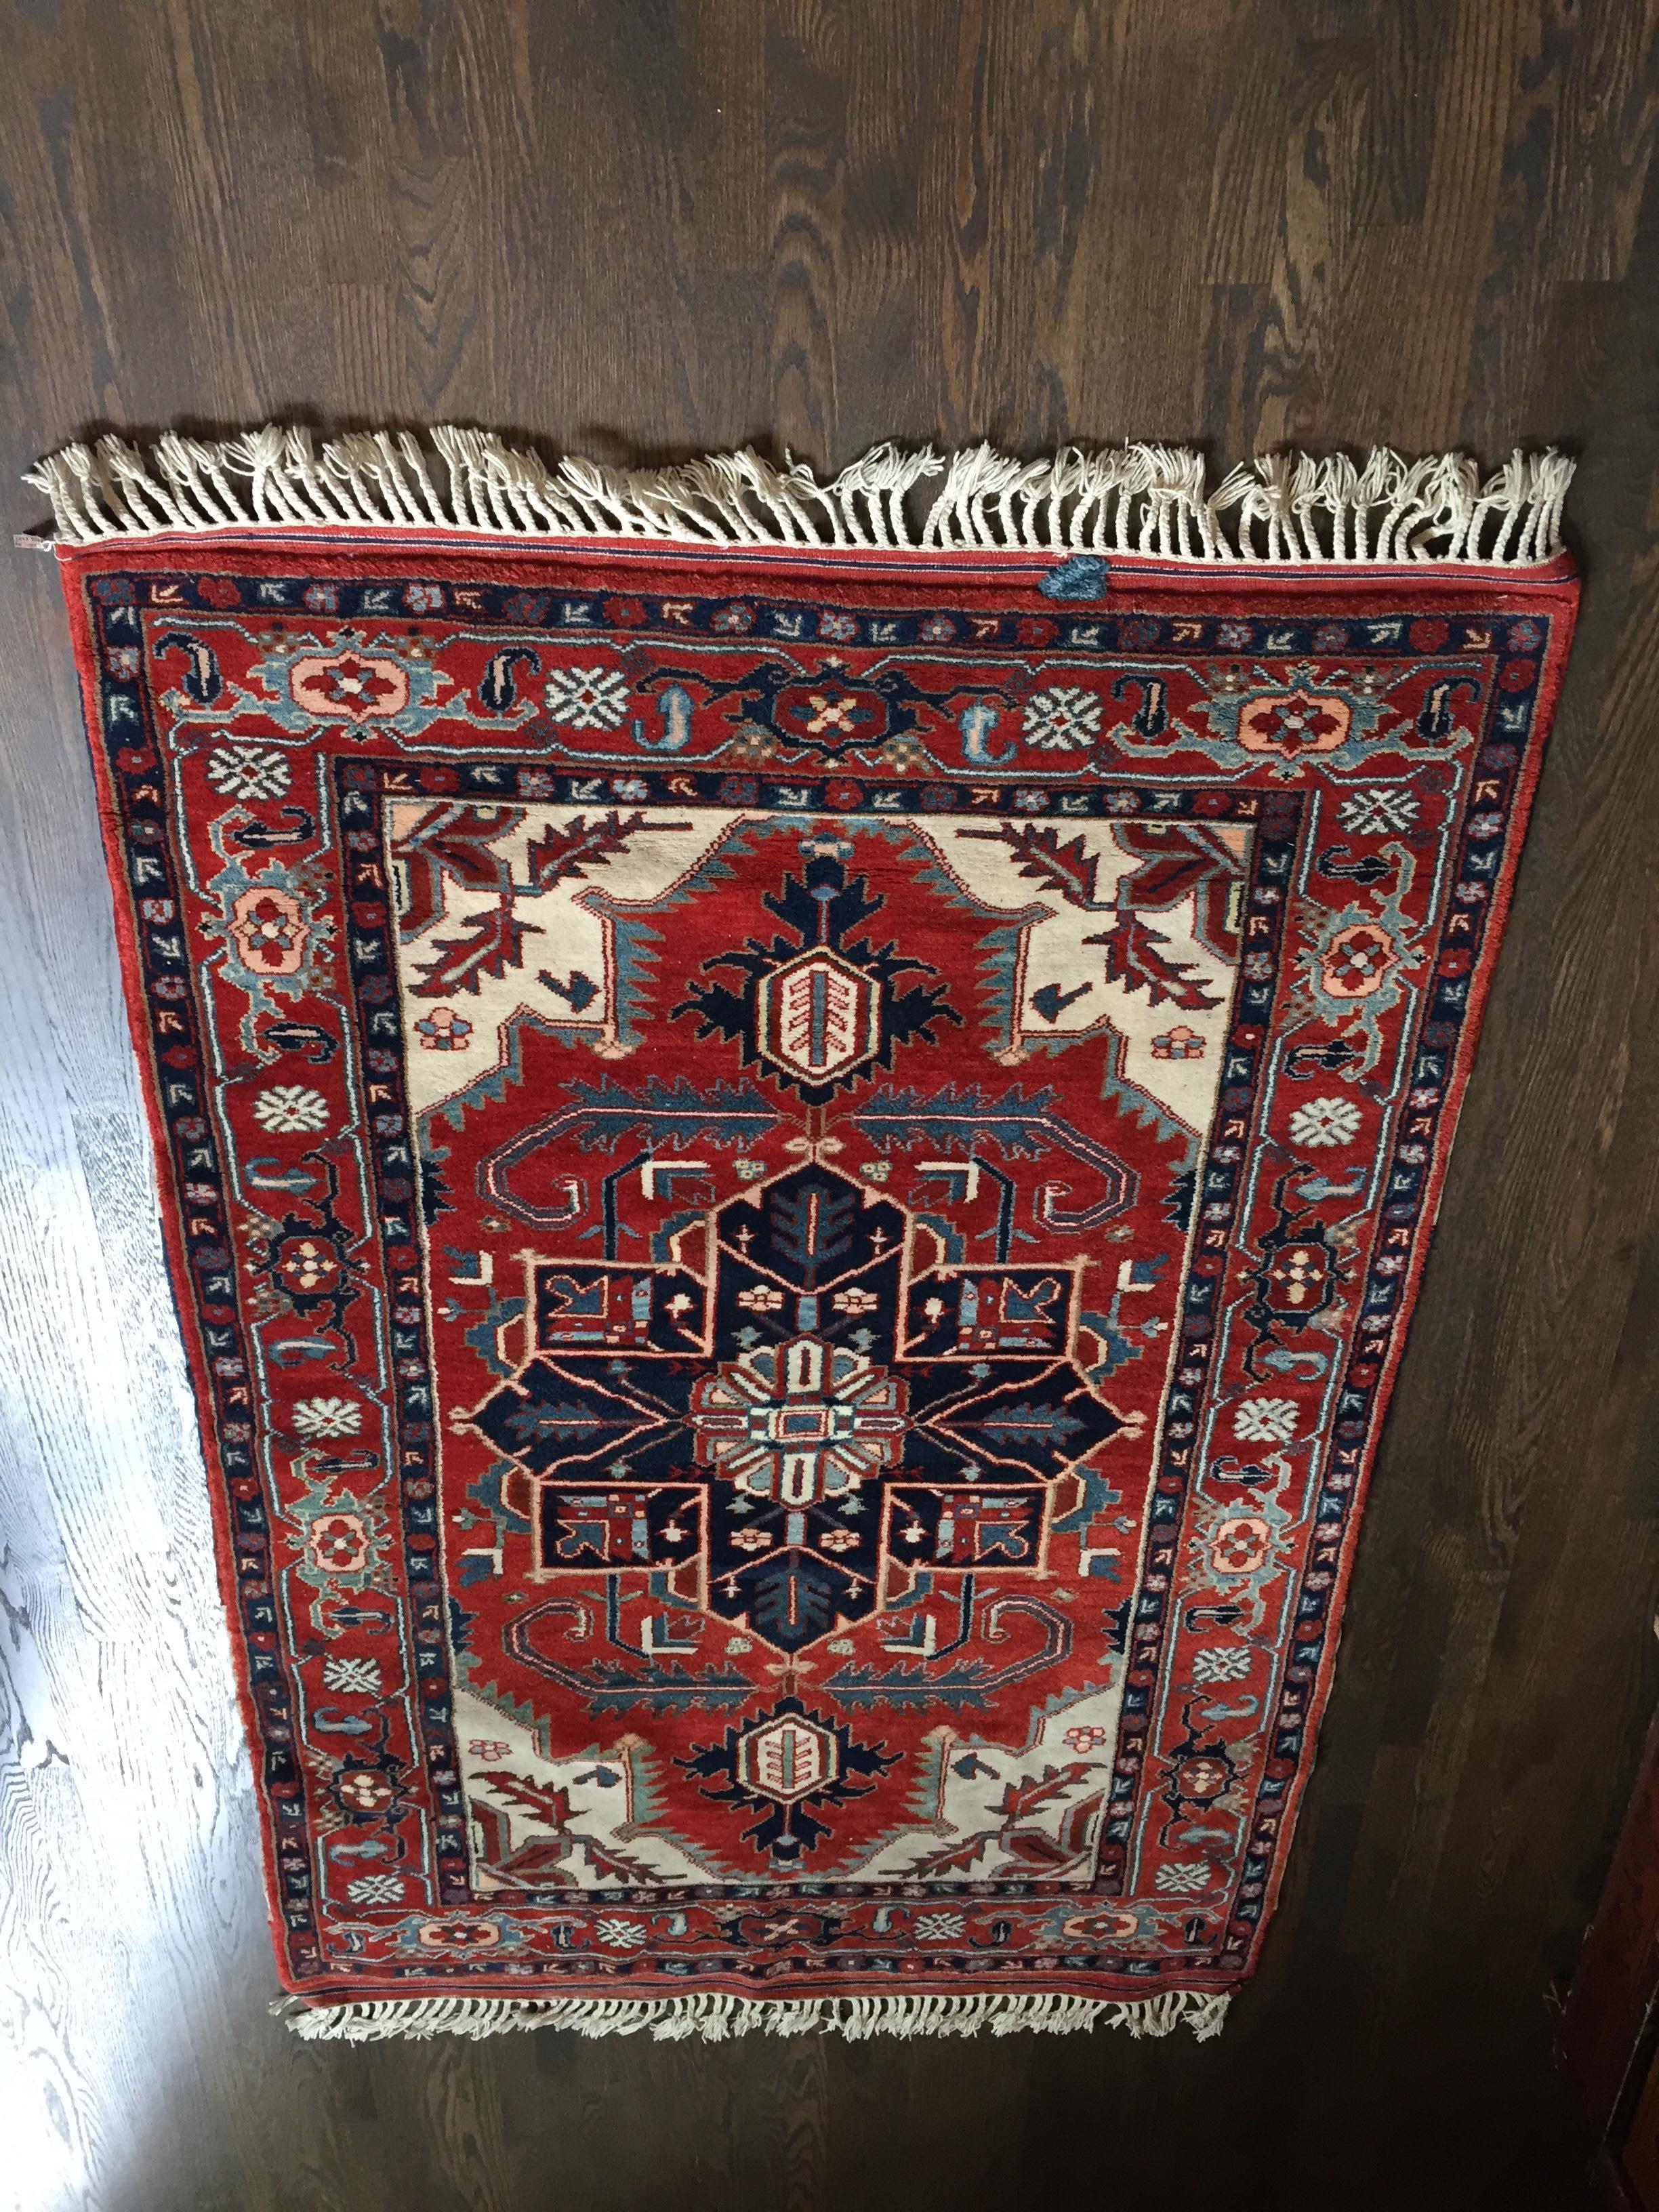 Handmade Heriz Persian rug never used 4x6
Purchased for a second home and never used, this Heriz Persian rug has incredible color and depth - Genuine Persian Rug in Heriz pattern in navy, beige, rust, blue approx. 4' x 6' like new - never on